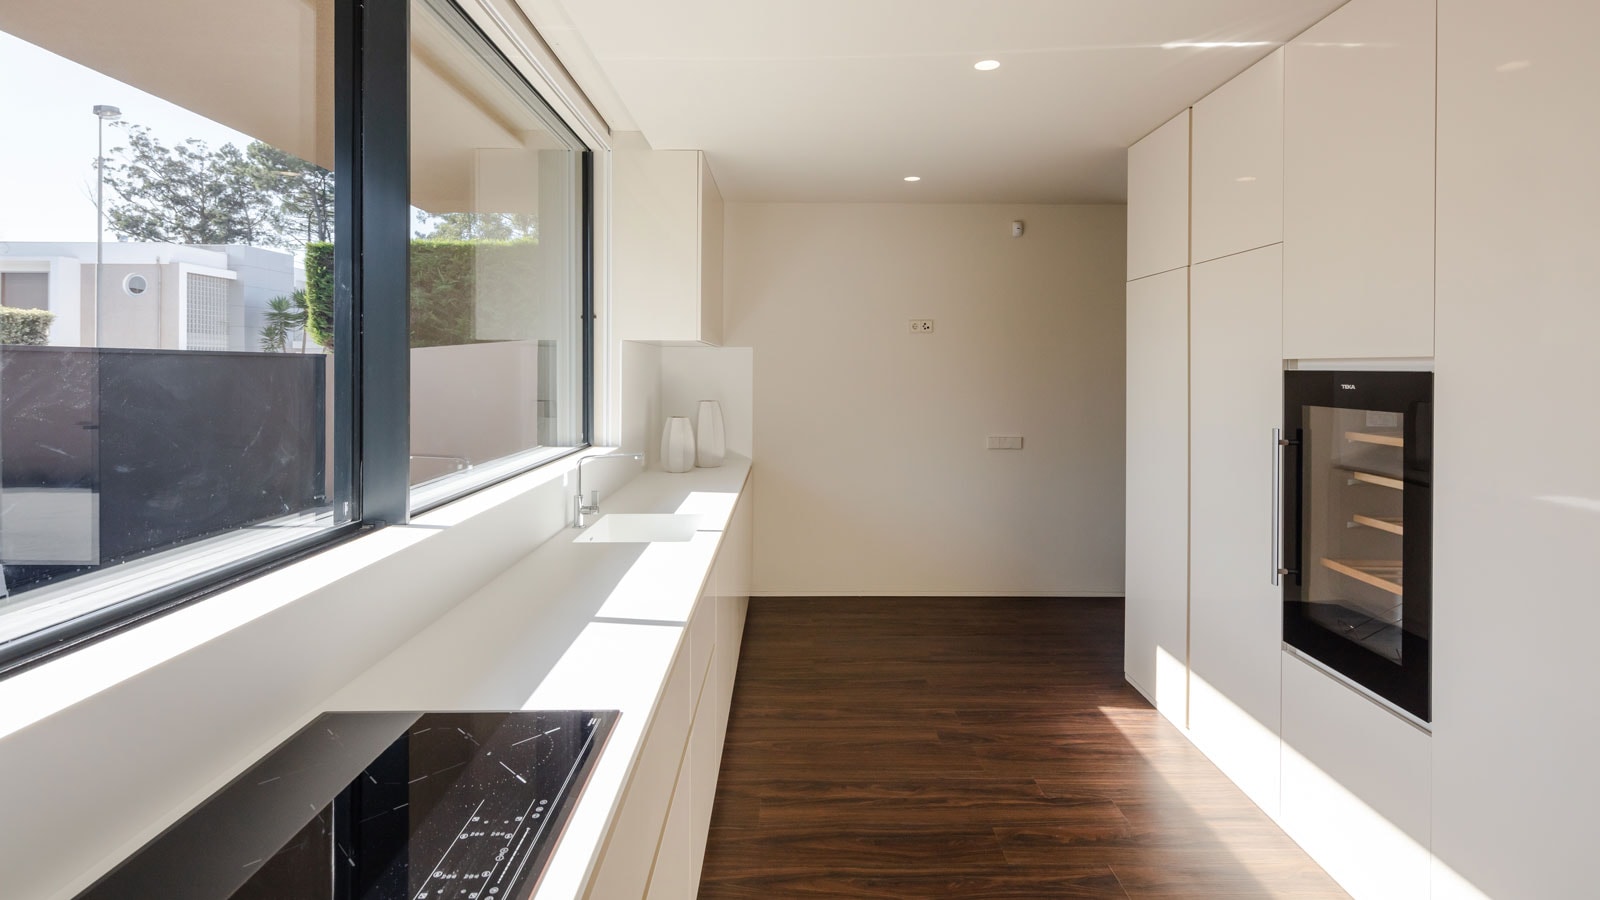 PORCELANOSA Group Projects: Casa Areia in Porto, an extra-bright property designed to enjoy